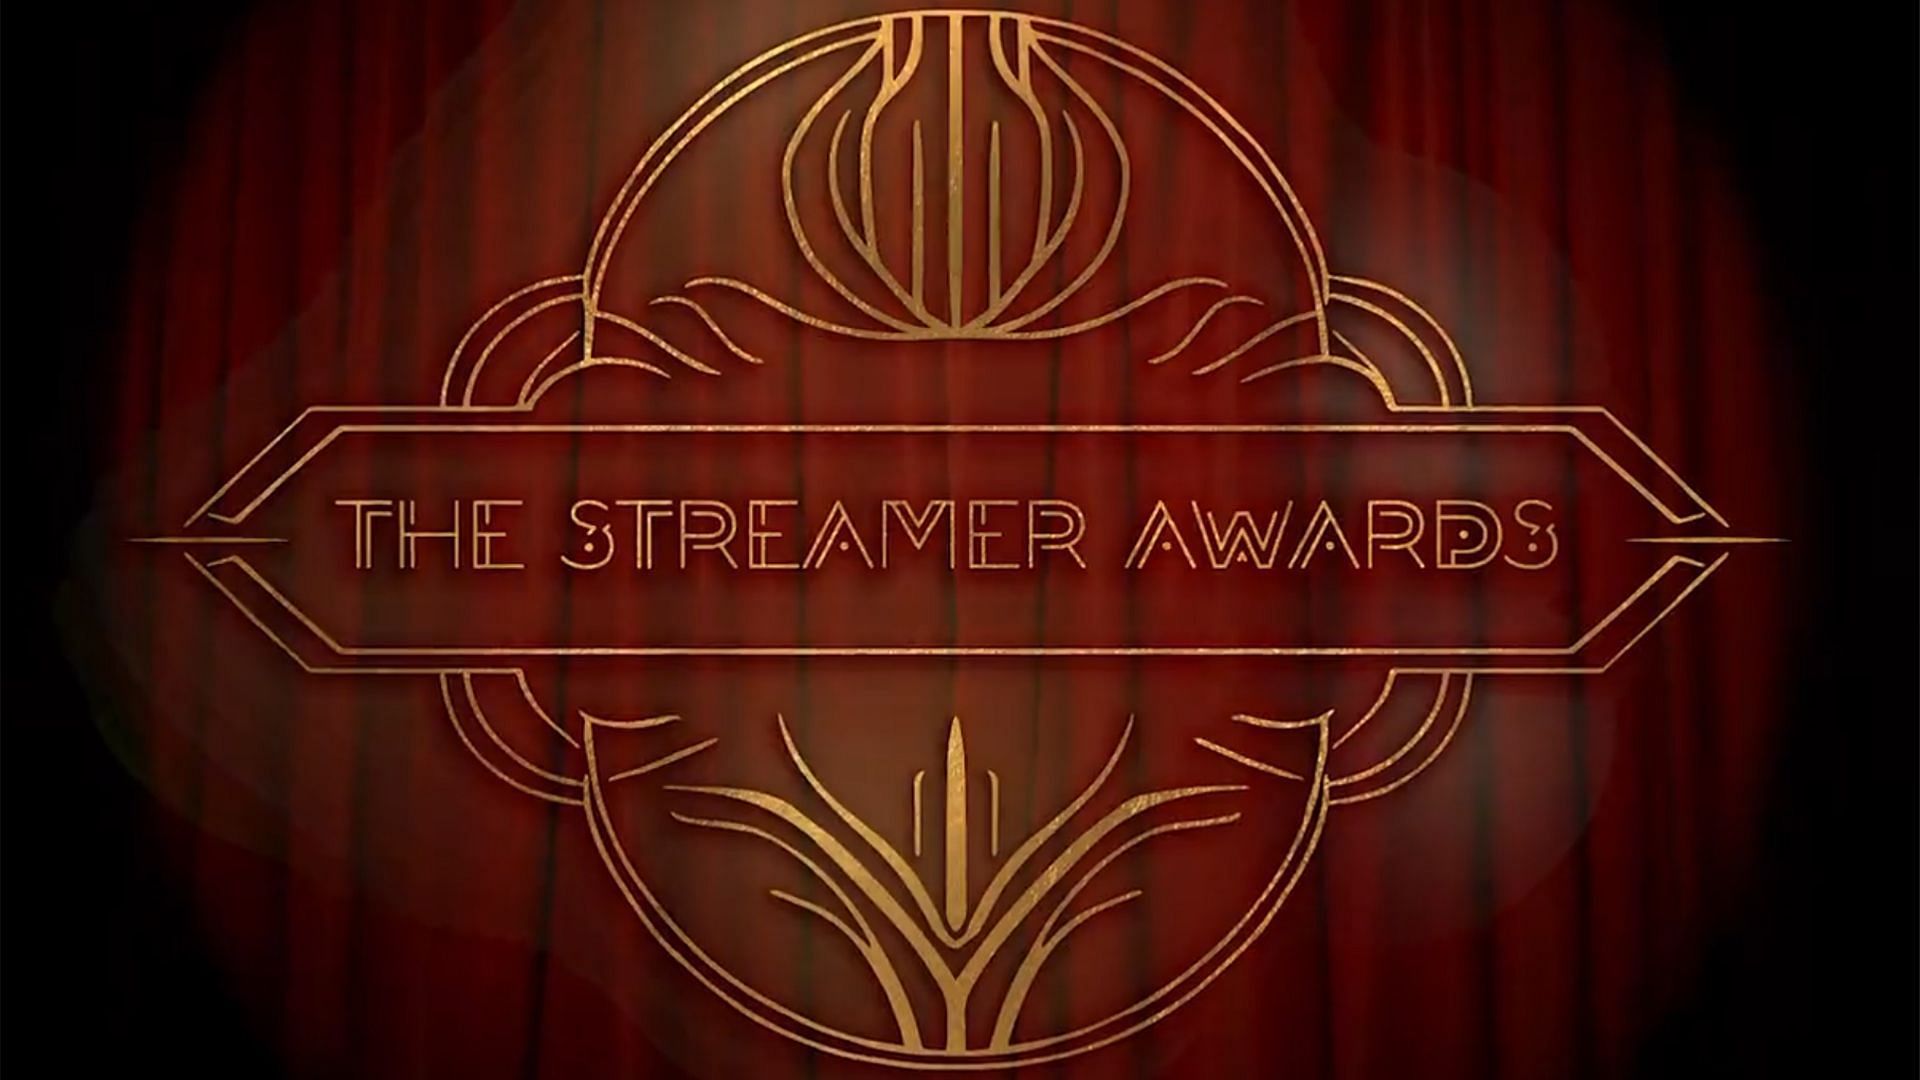 Streamer Awards 2023 Nominations, categories, livestream date, and